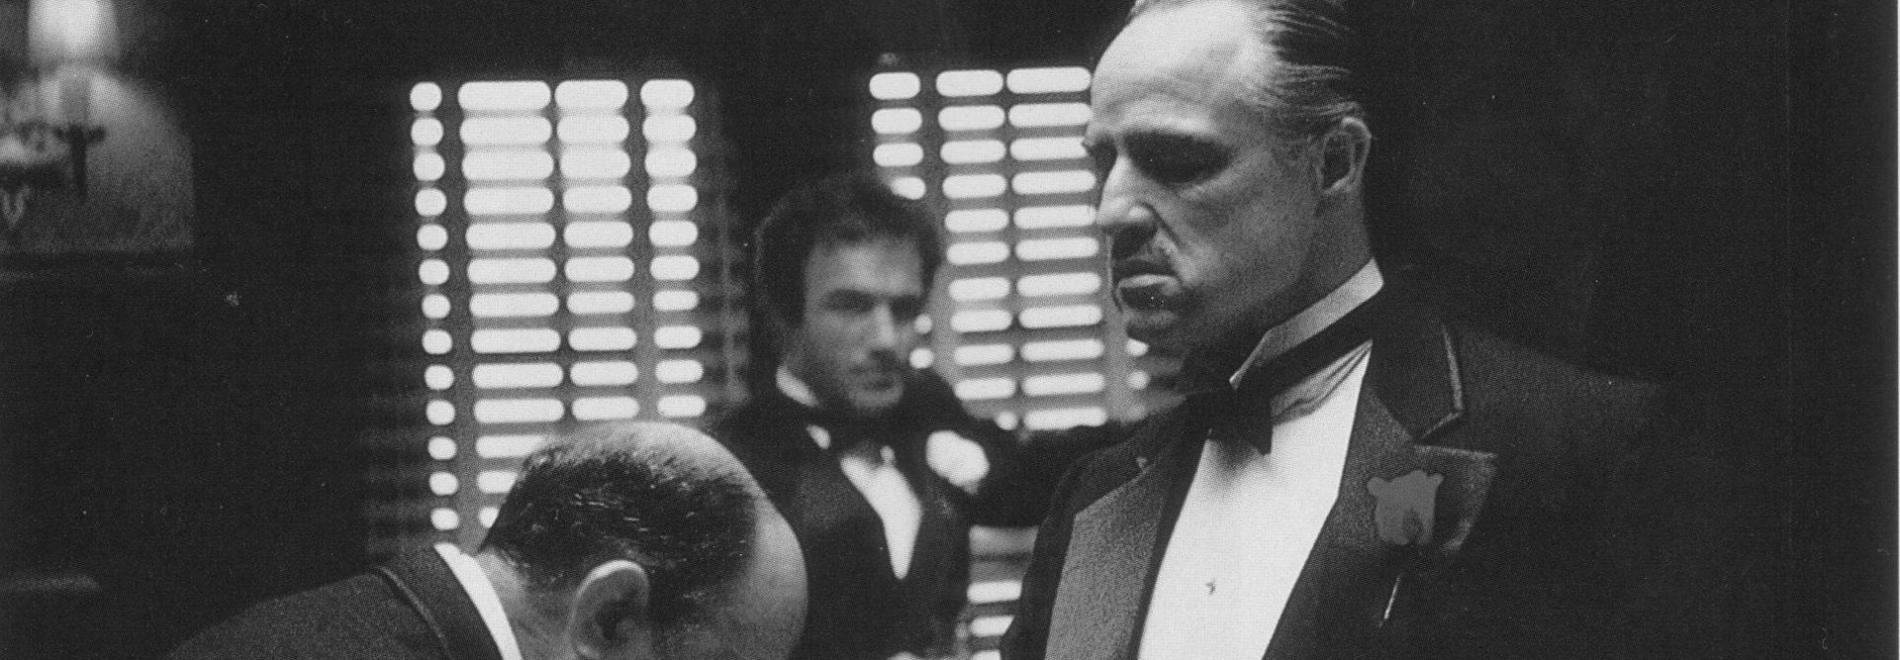 The Godfather (Francis Ford Coppola, 1972)